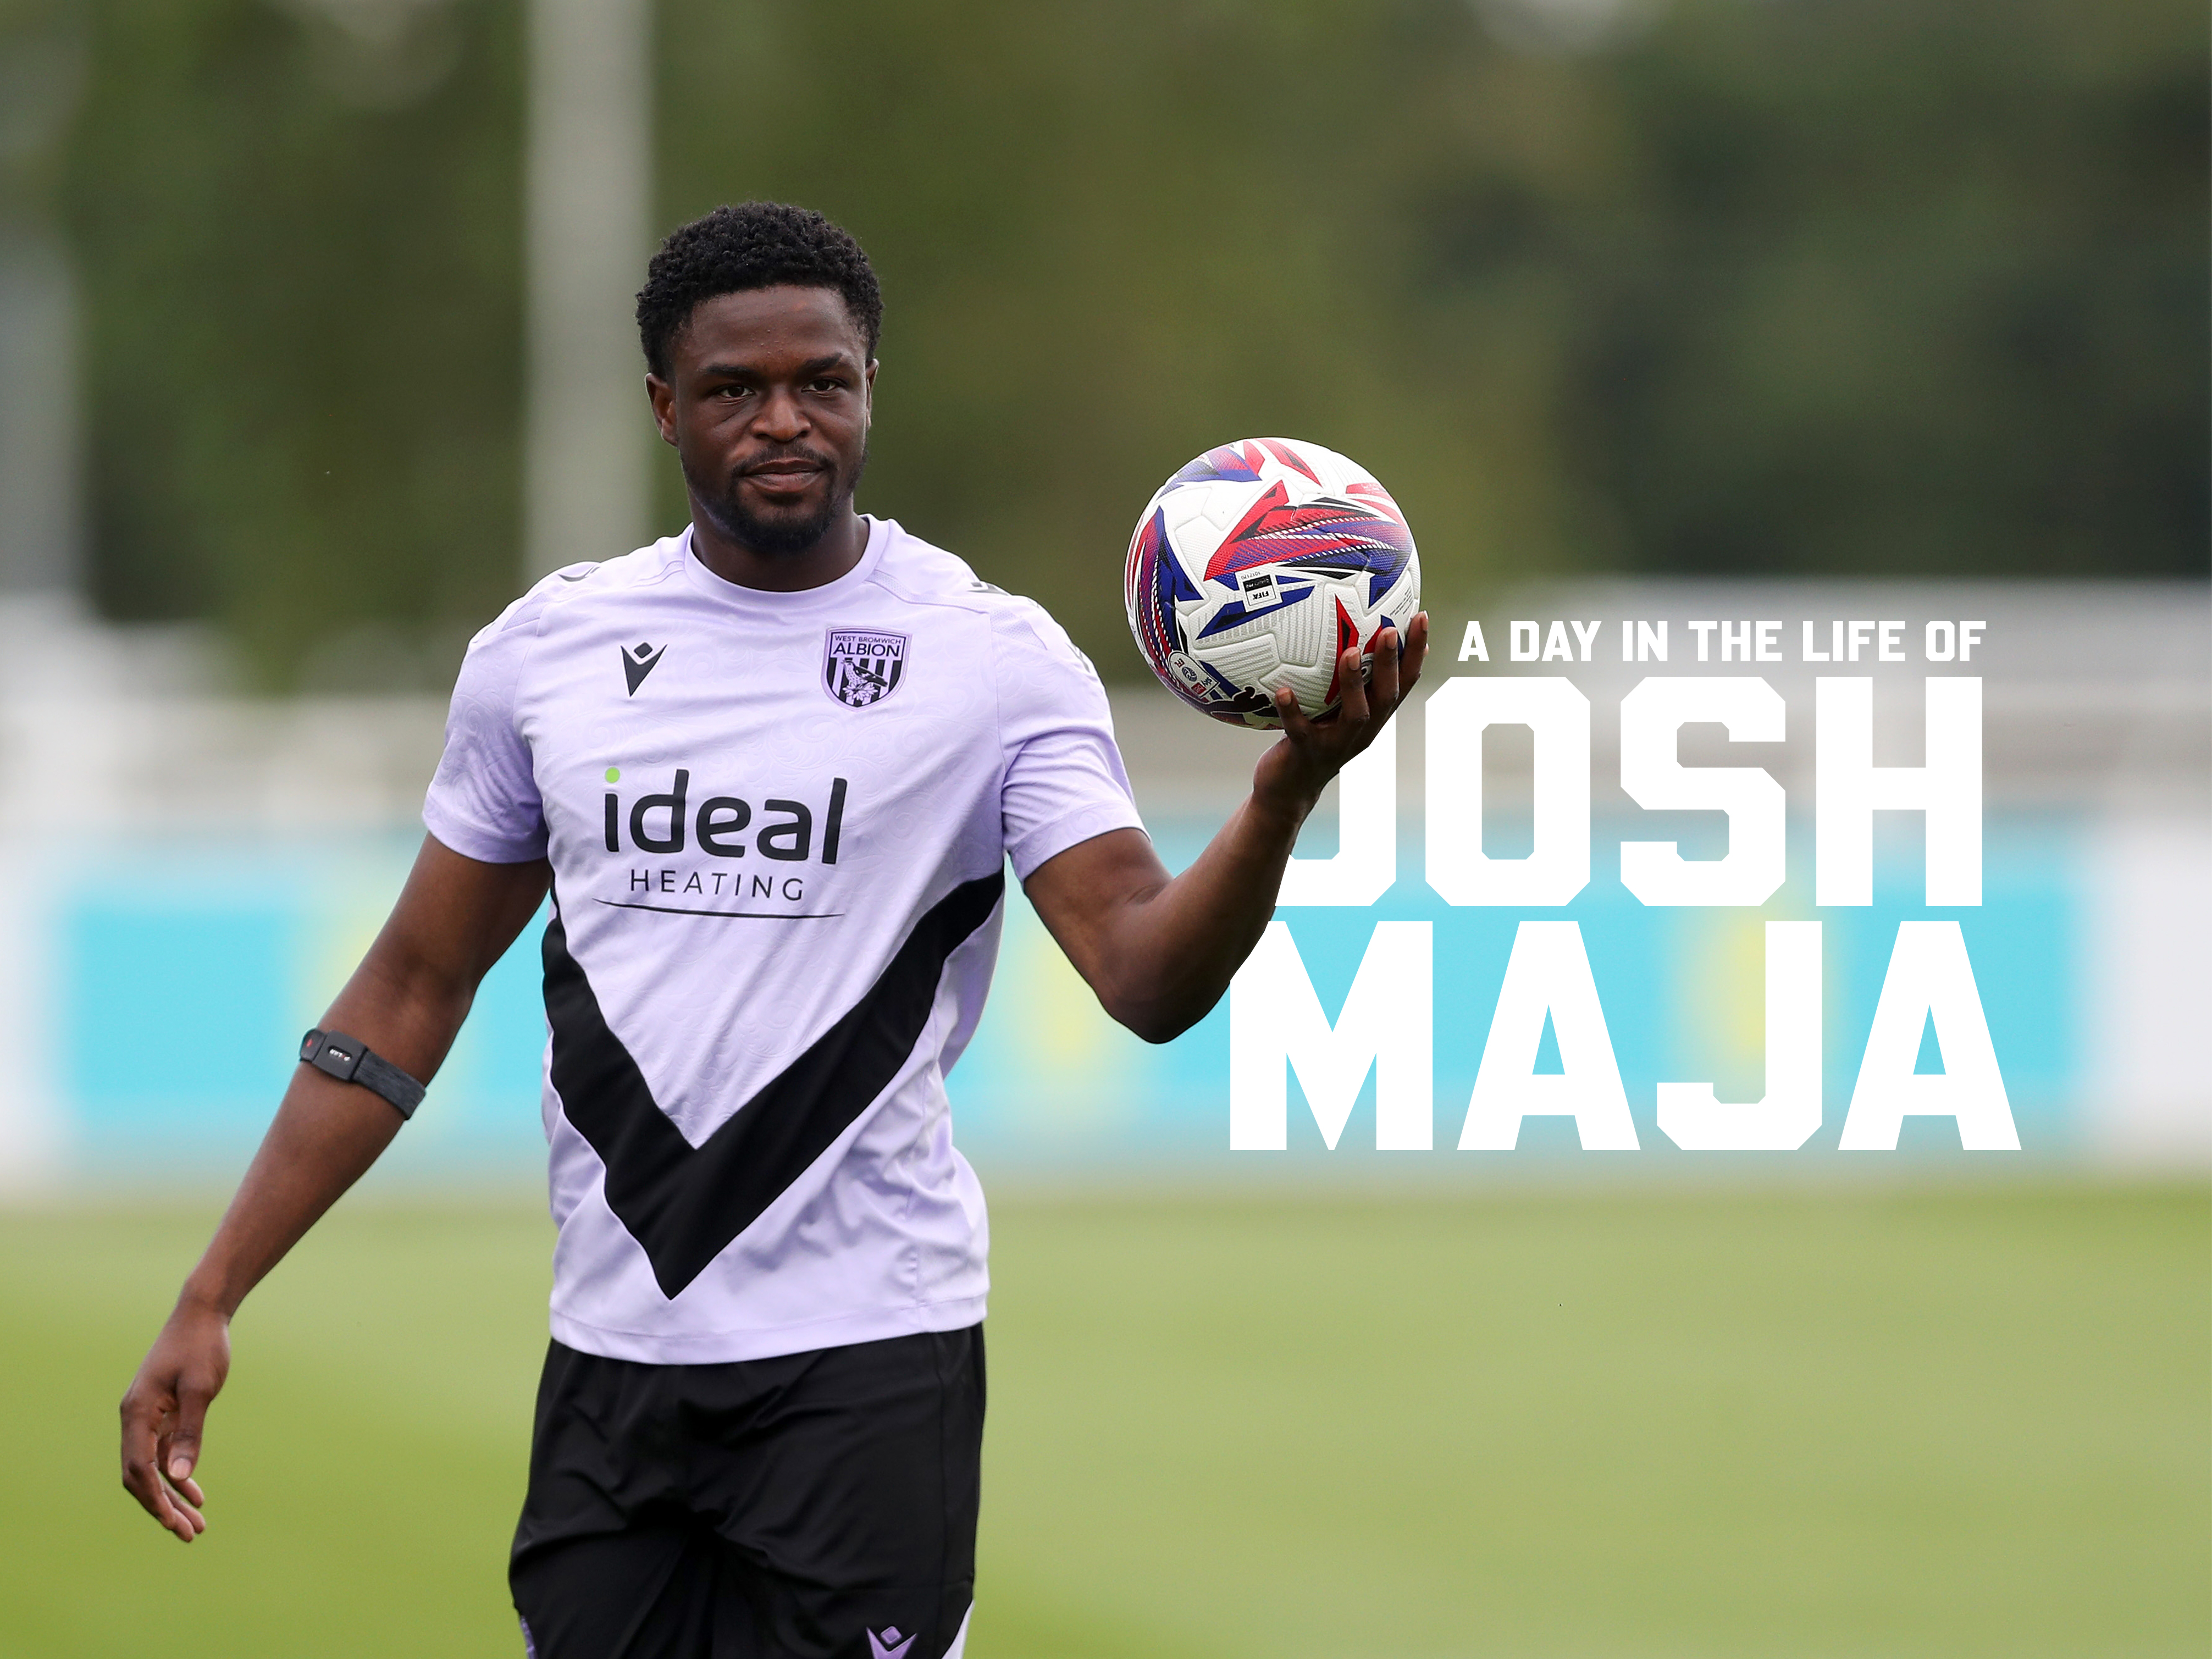 Josh Maja holding a ball in his hand next to writing which says A day in the life of Josh Maja